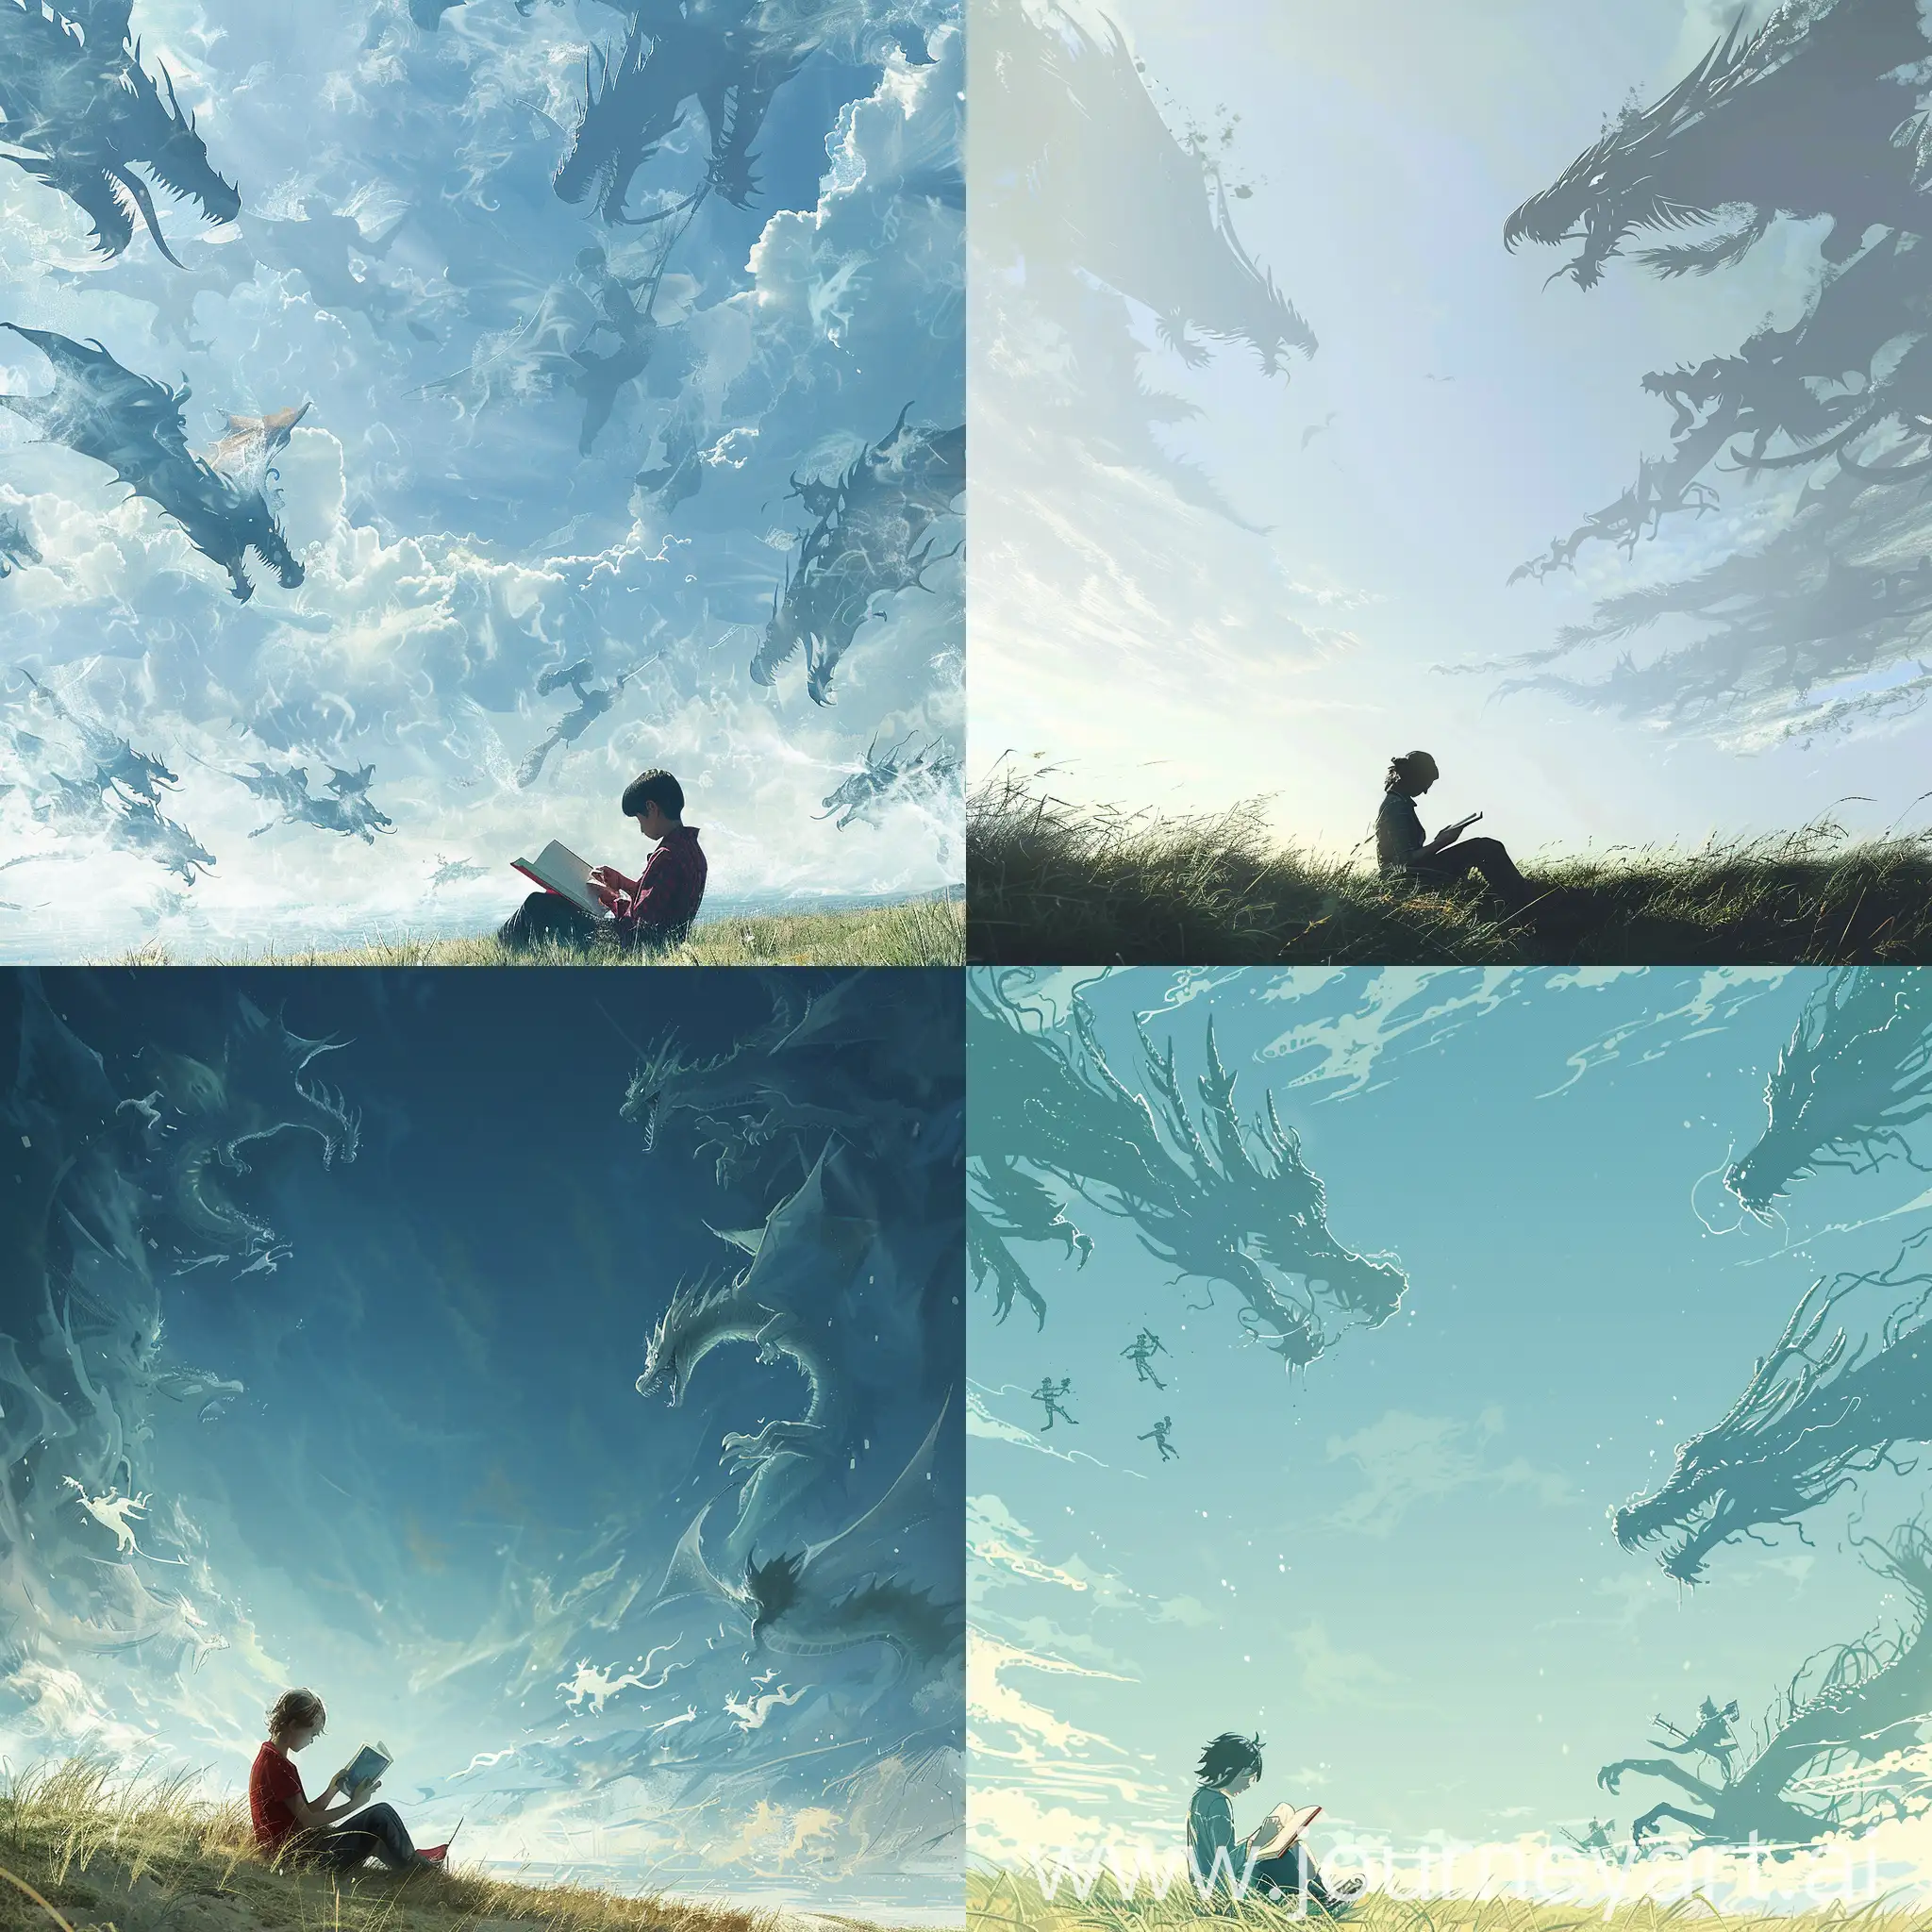 Solitary-Figure-Reading-Diary-Amidst-Epic-Dragon-Battle-Sky